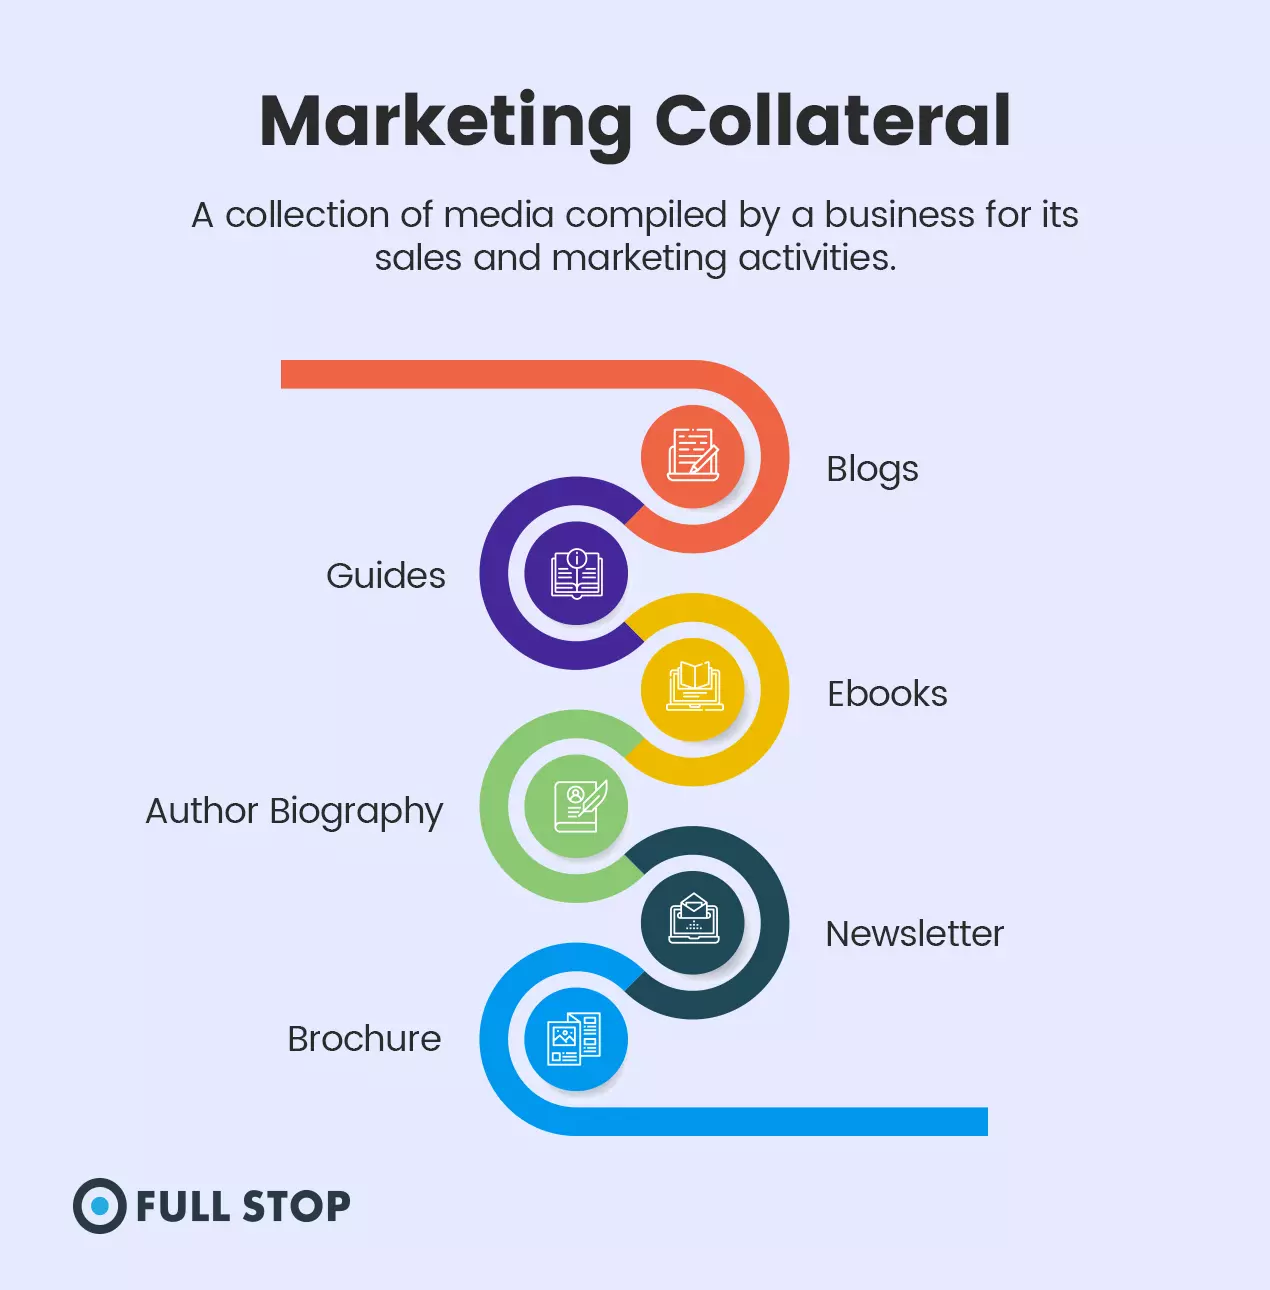 What media is included in marketing collateral